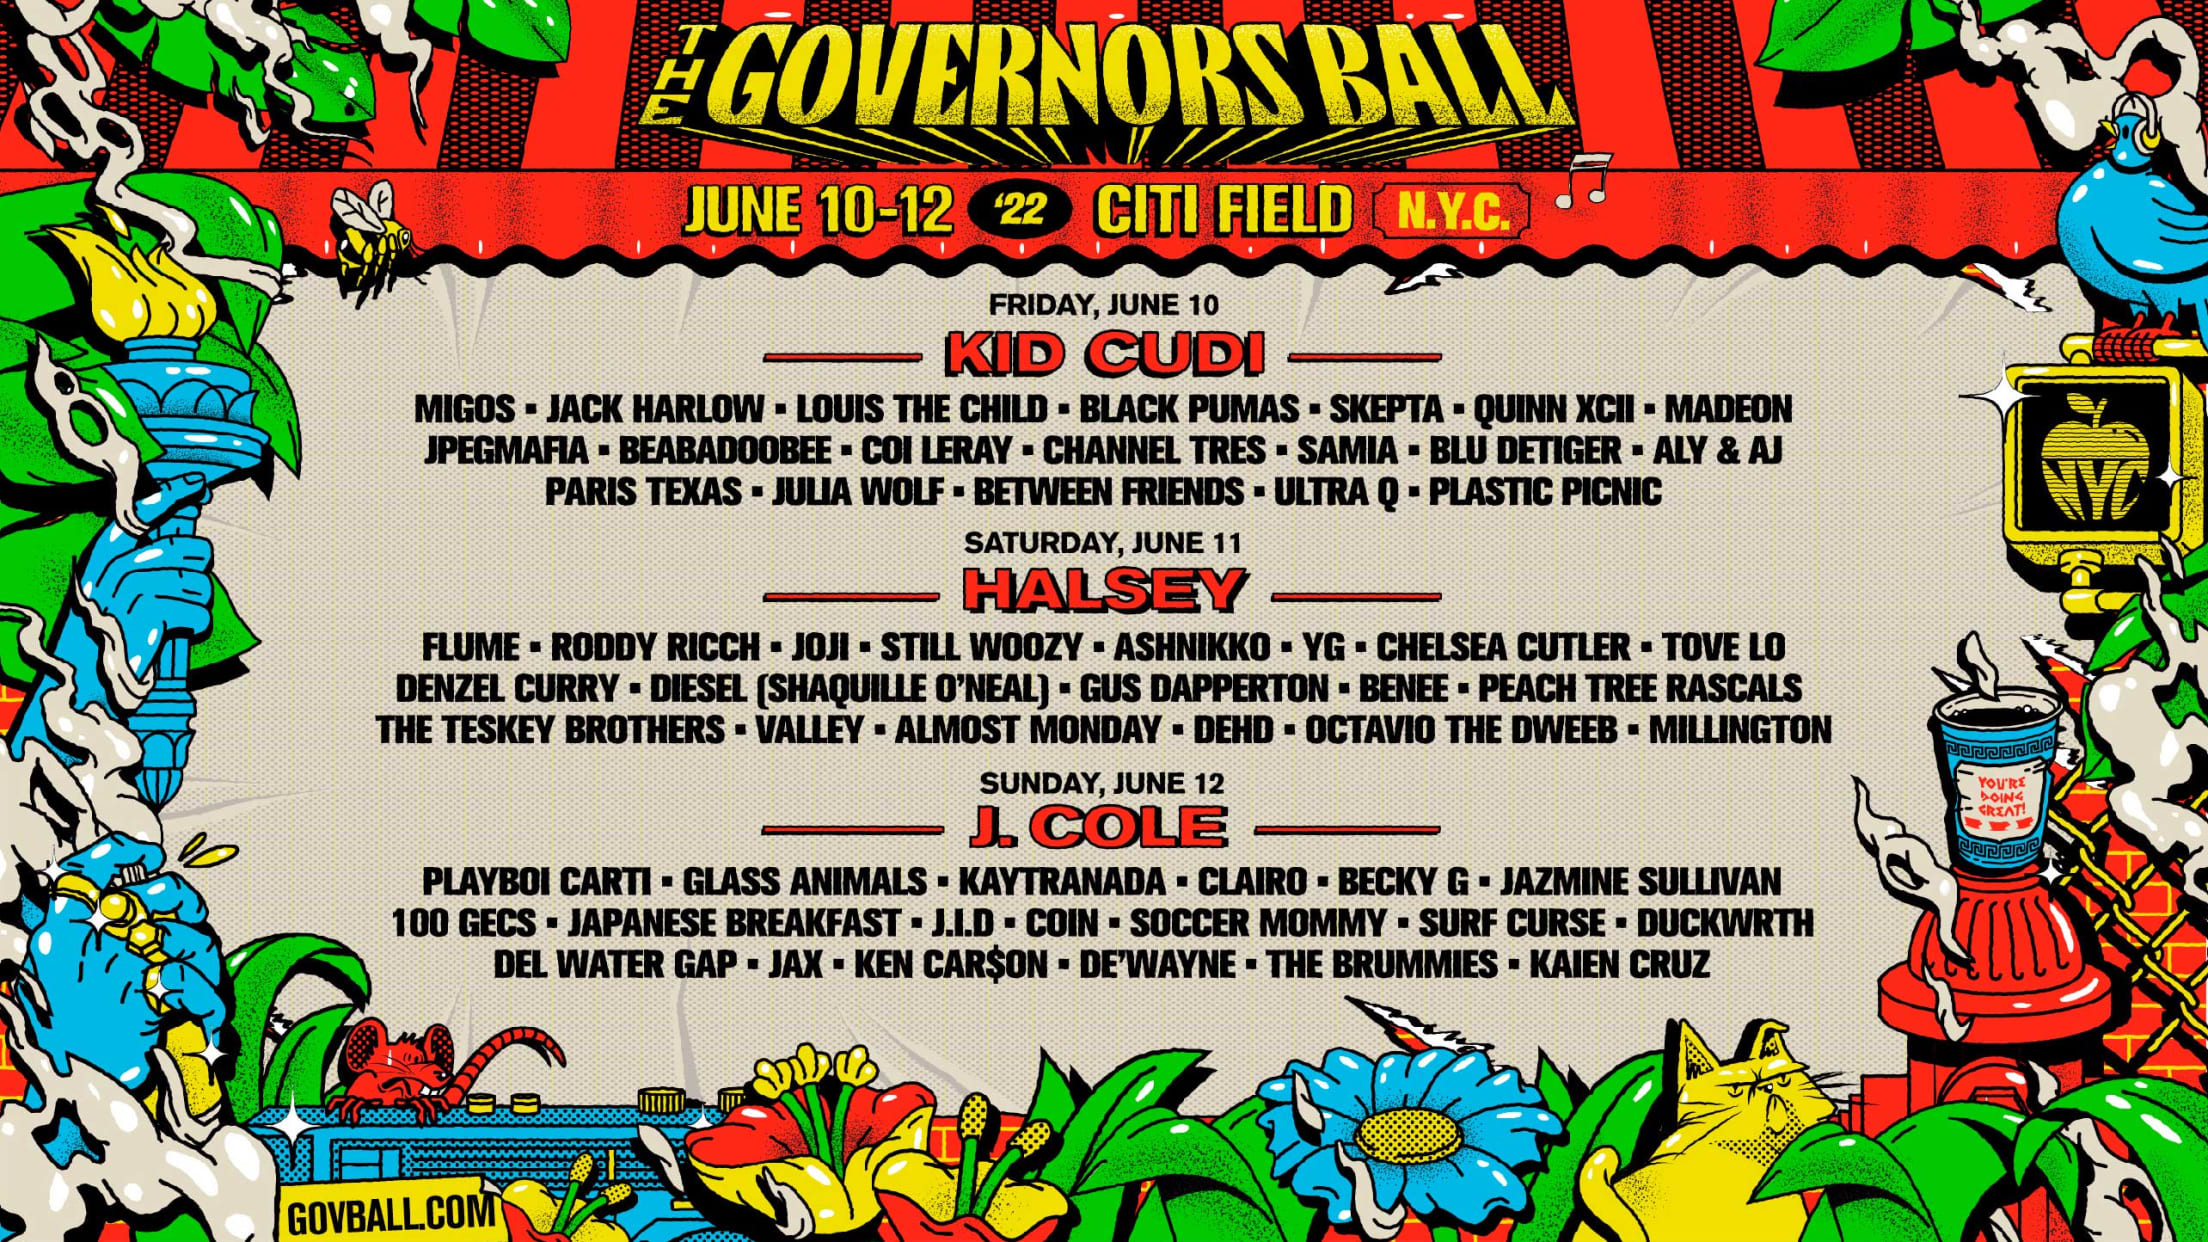 The Governors Ball New York Mets